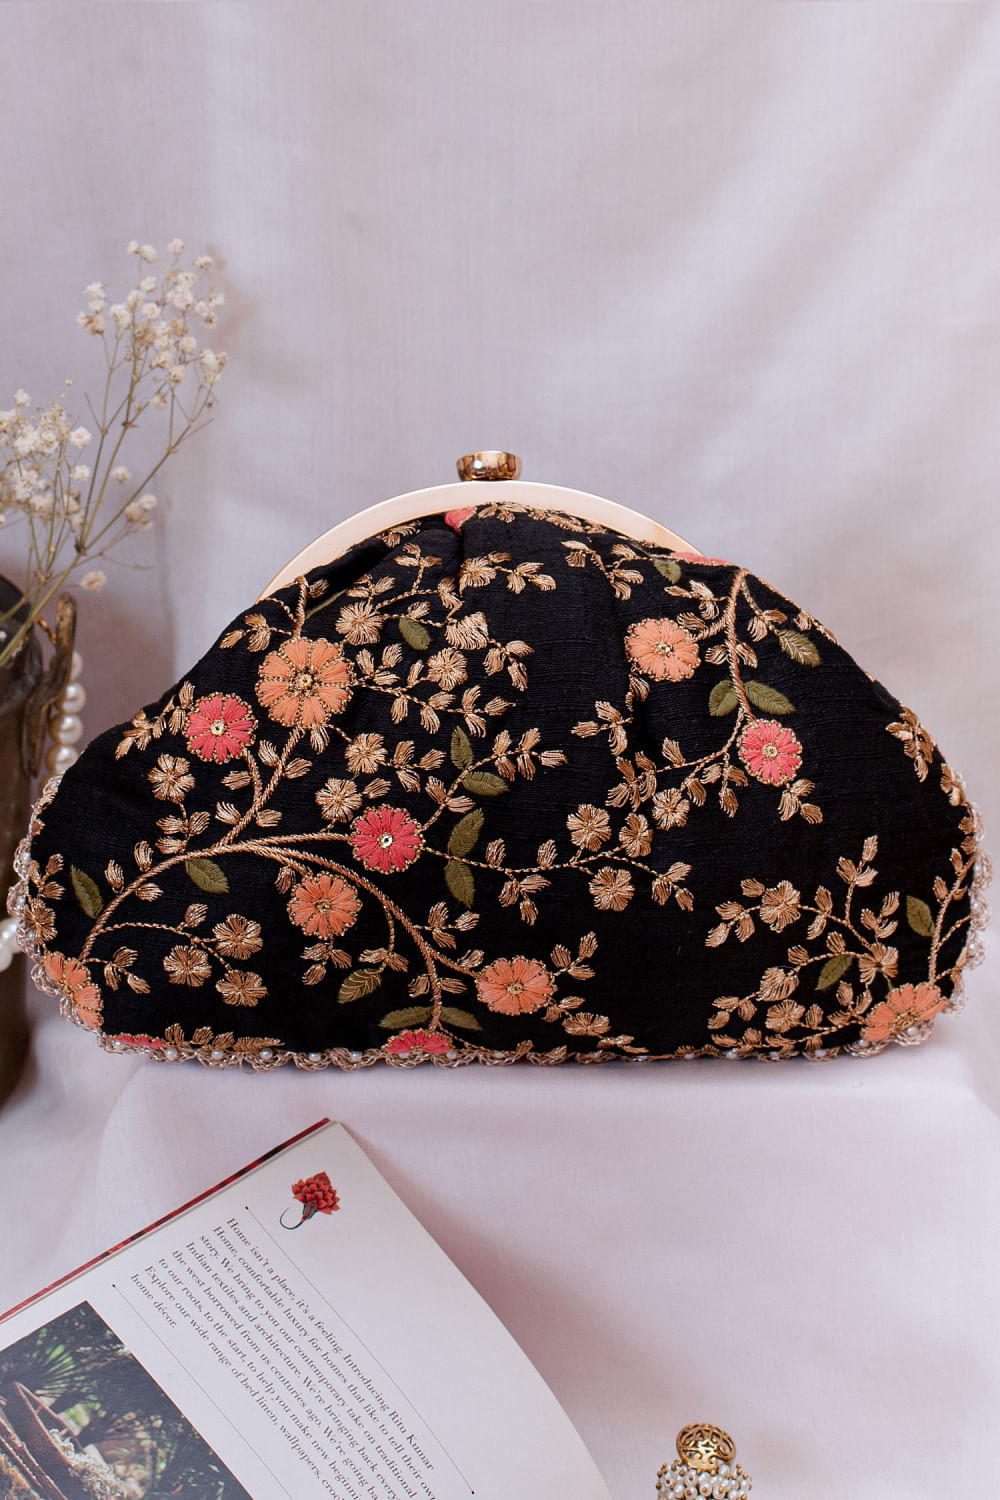 Floral Embroidered Peony Black Canvas Boho Handbag, pink, red, yellow,  white, silver, green, floral,. embroidery, embroidered, black , handbag,  purse, bag, boho, boho chic, bohemian, cowgirl, gypsy, style, fashion,  wood, beautiful, boutique,